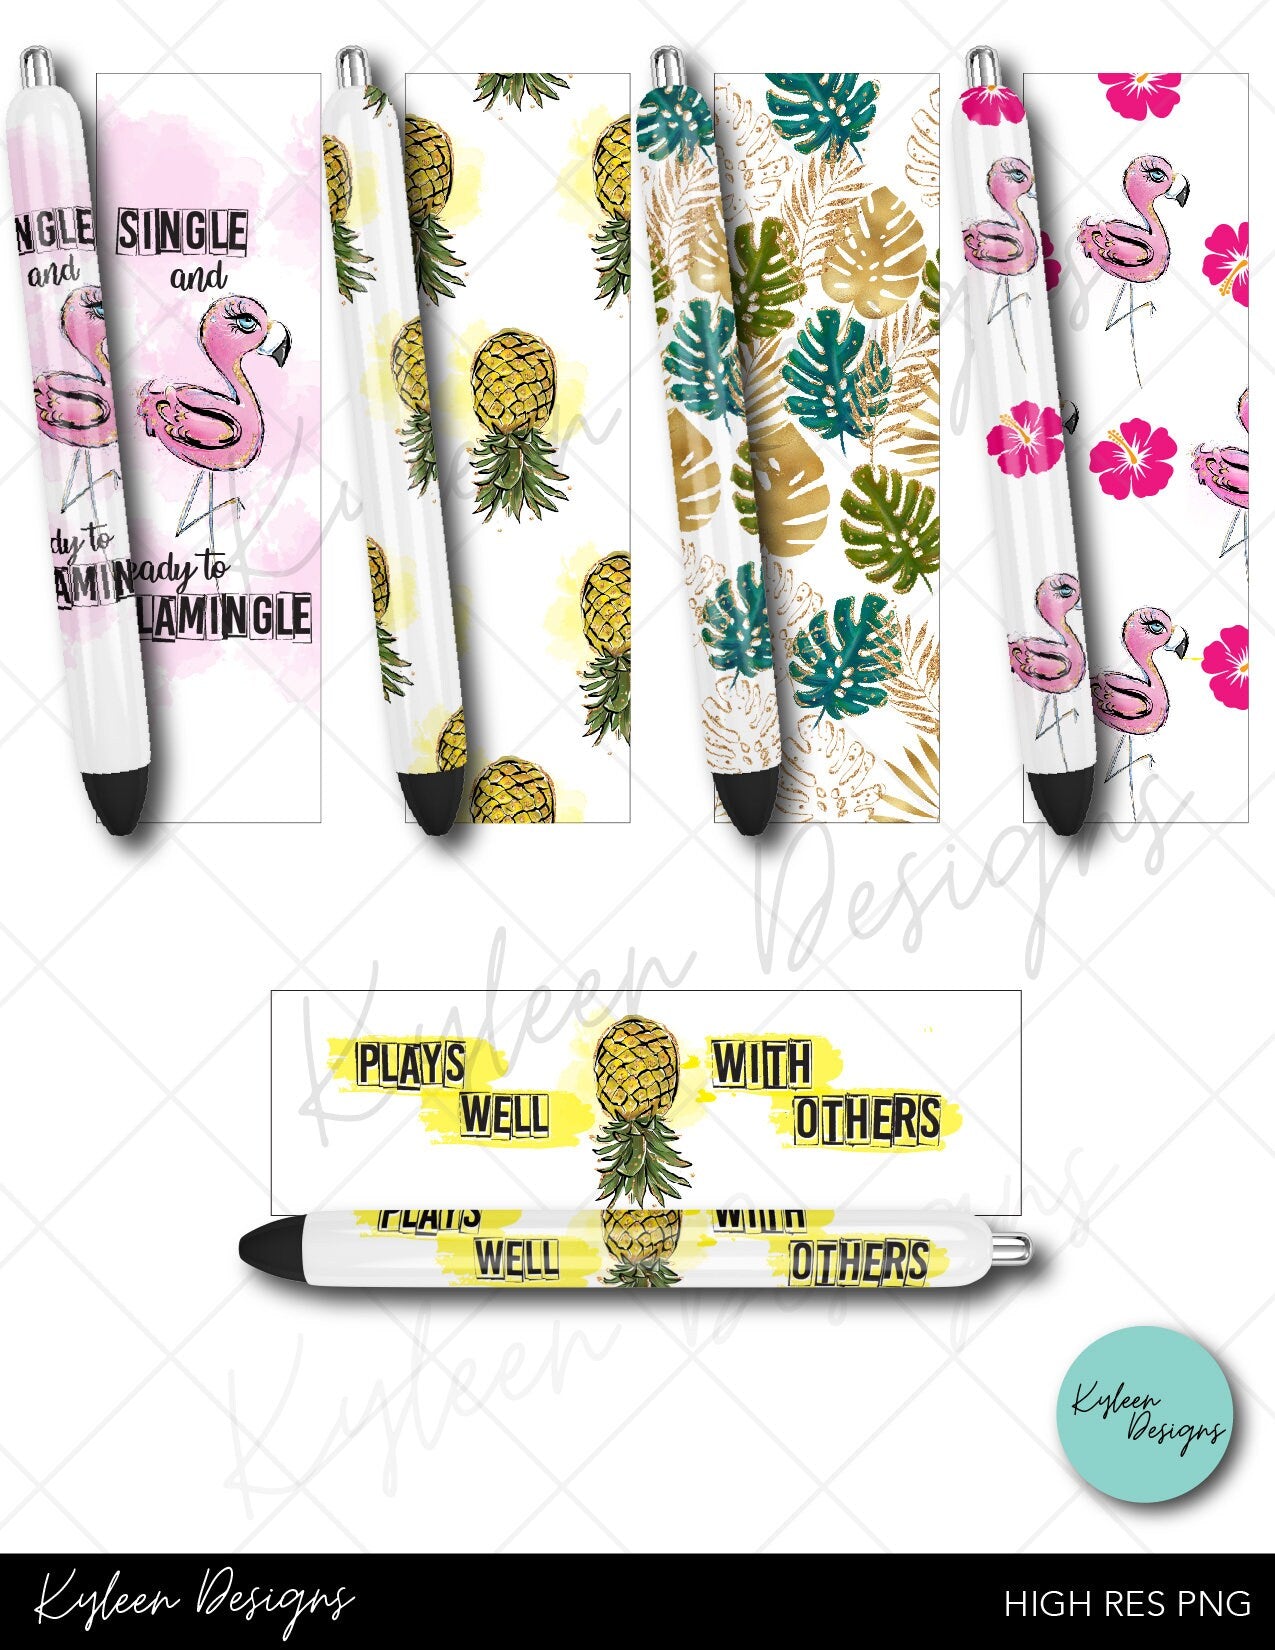 Tropical plays well with others pineapple flamingo pen wraps for waterslide high RES PNG